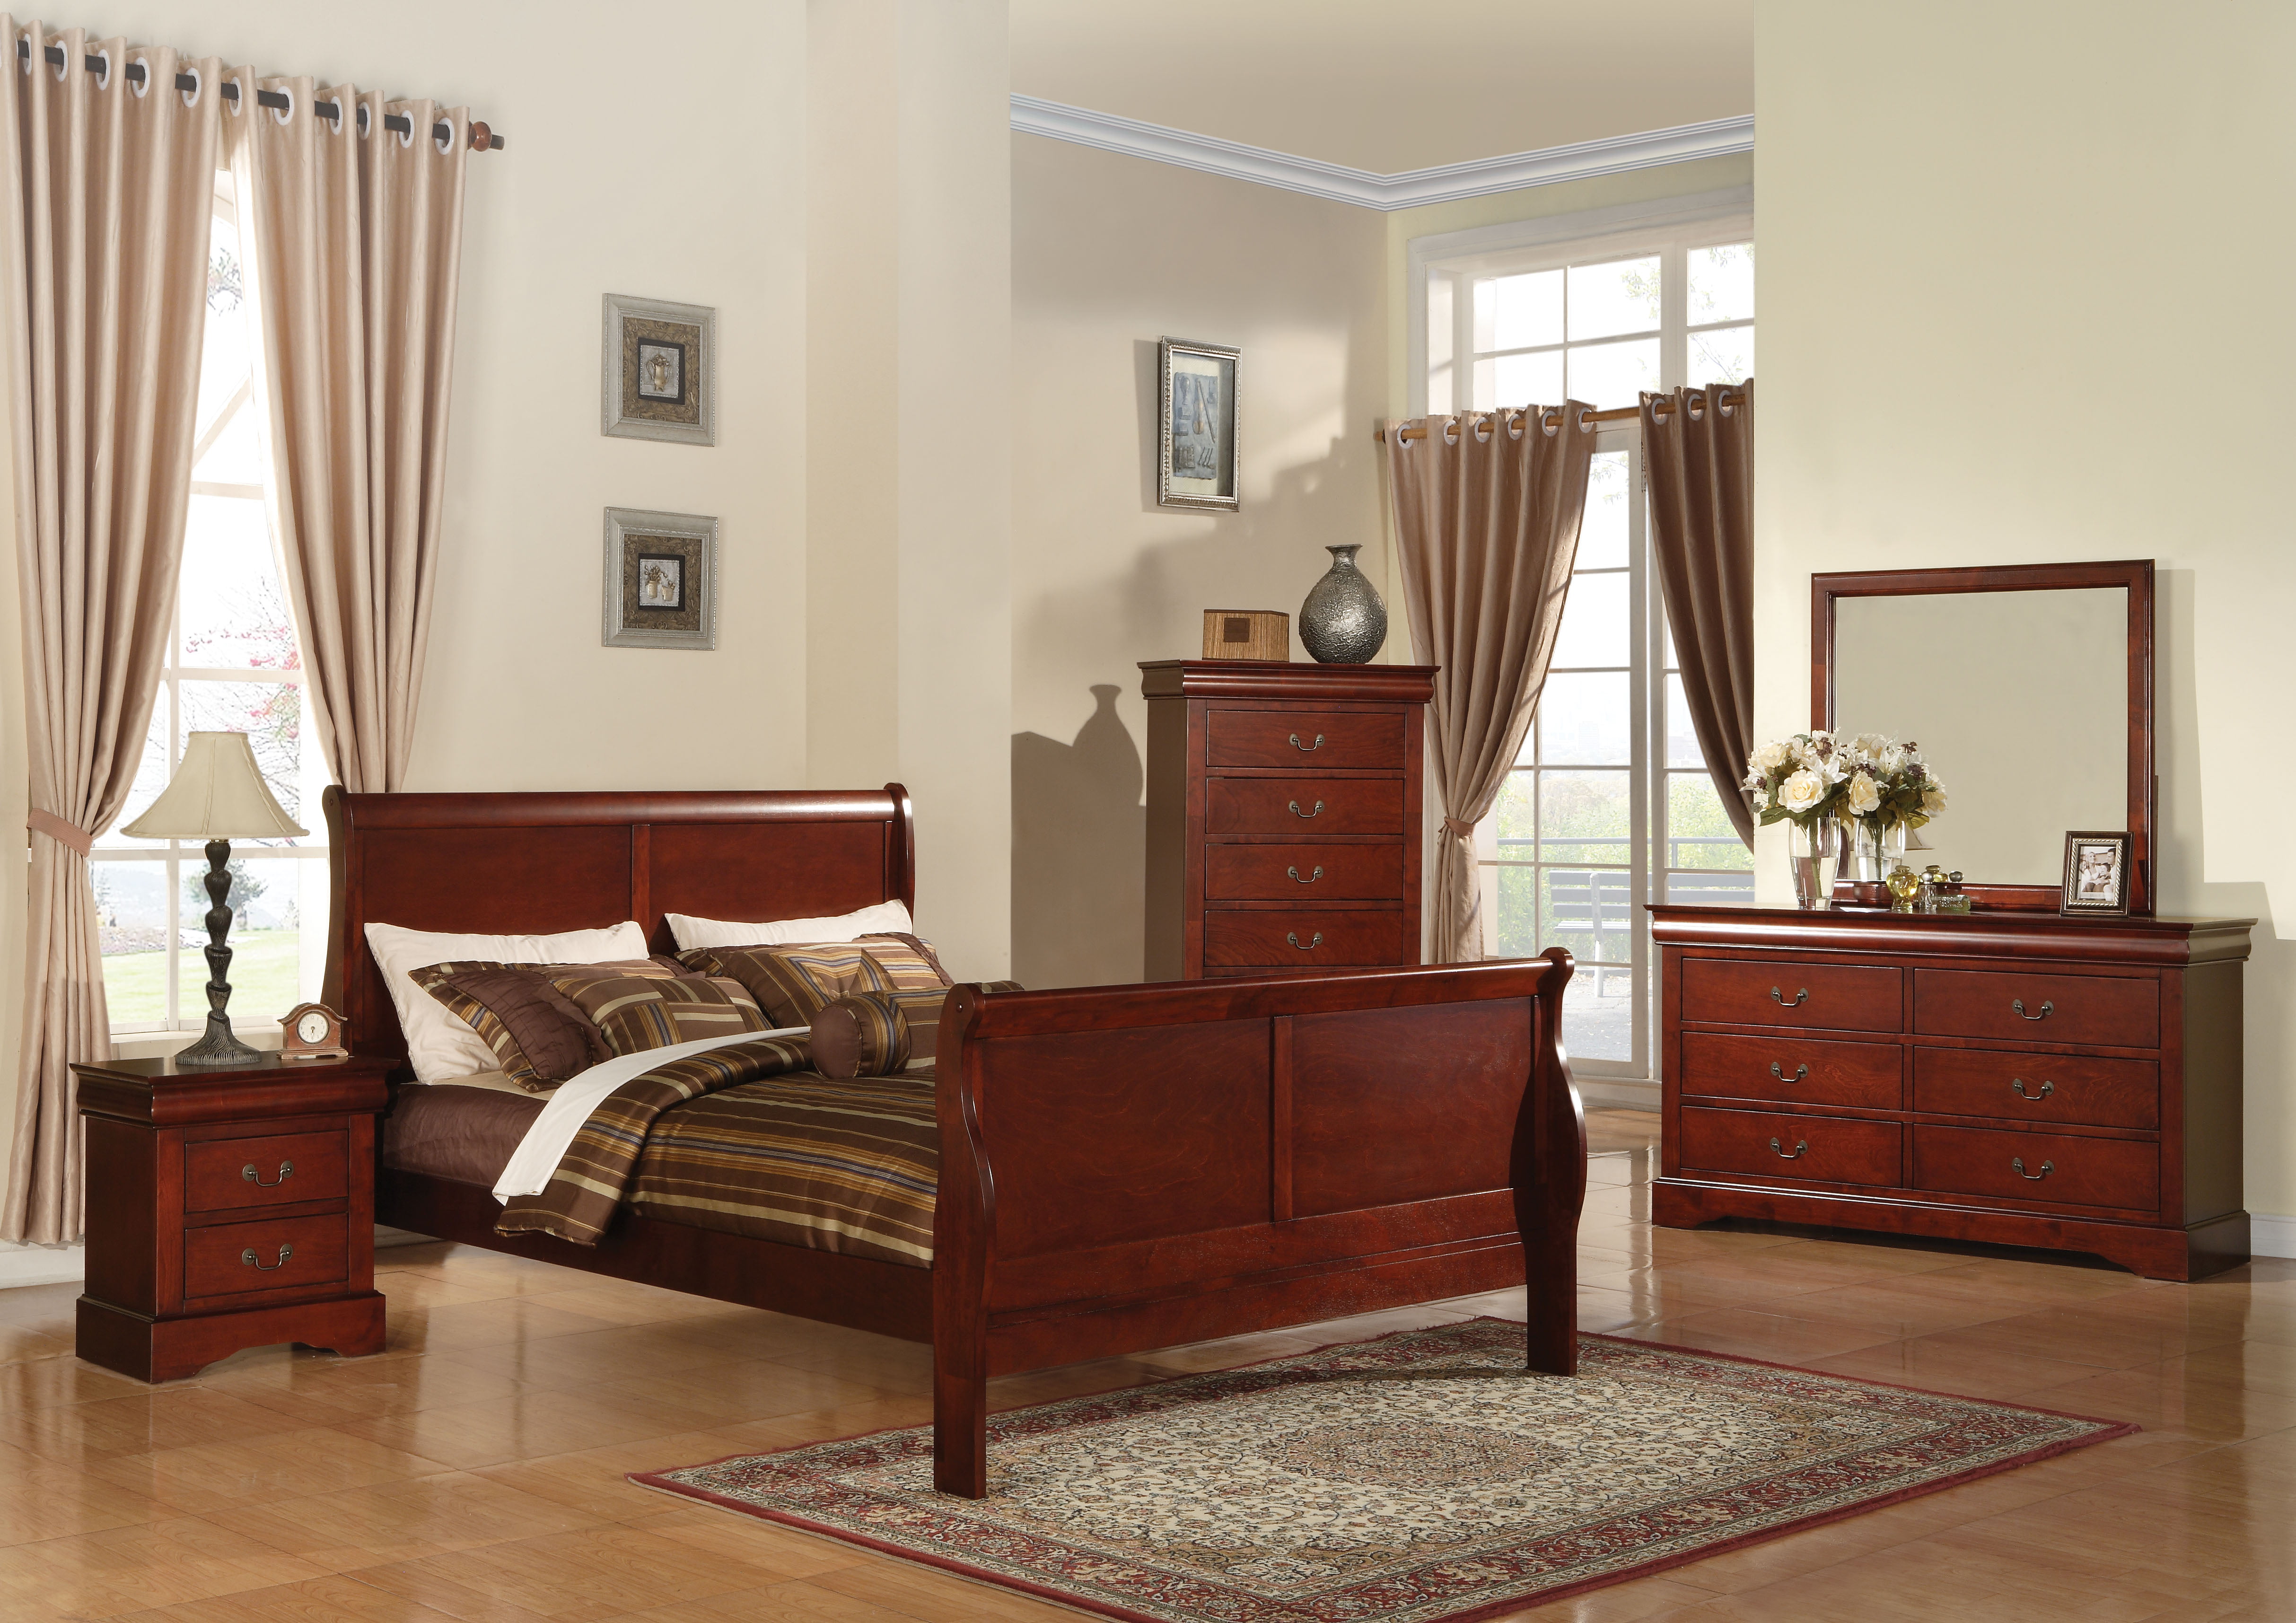 Cherry wood bed frame king - mintfas